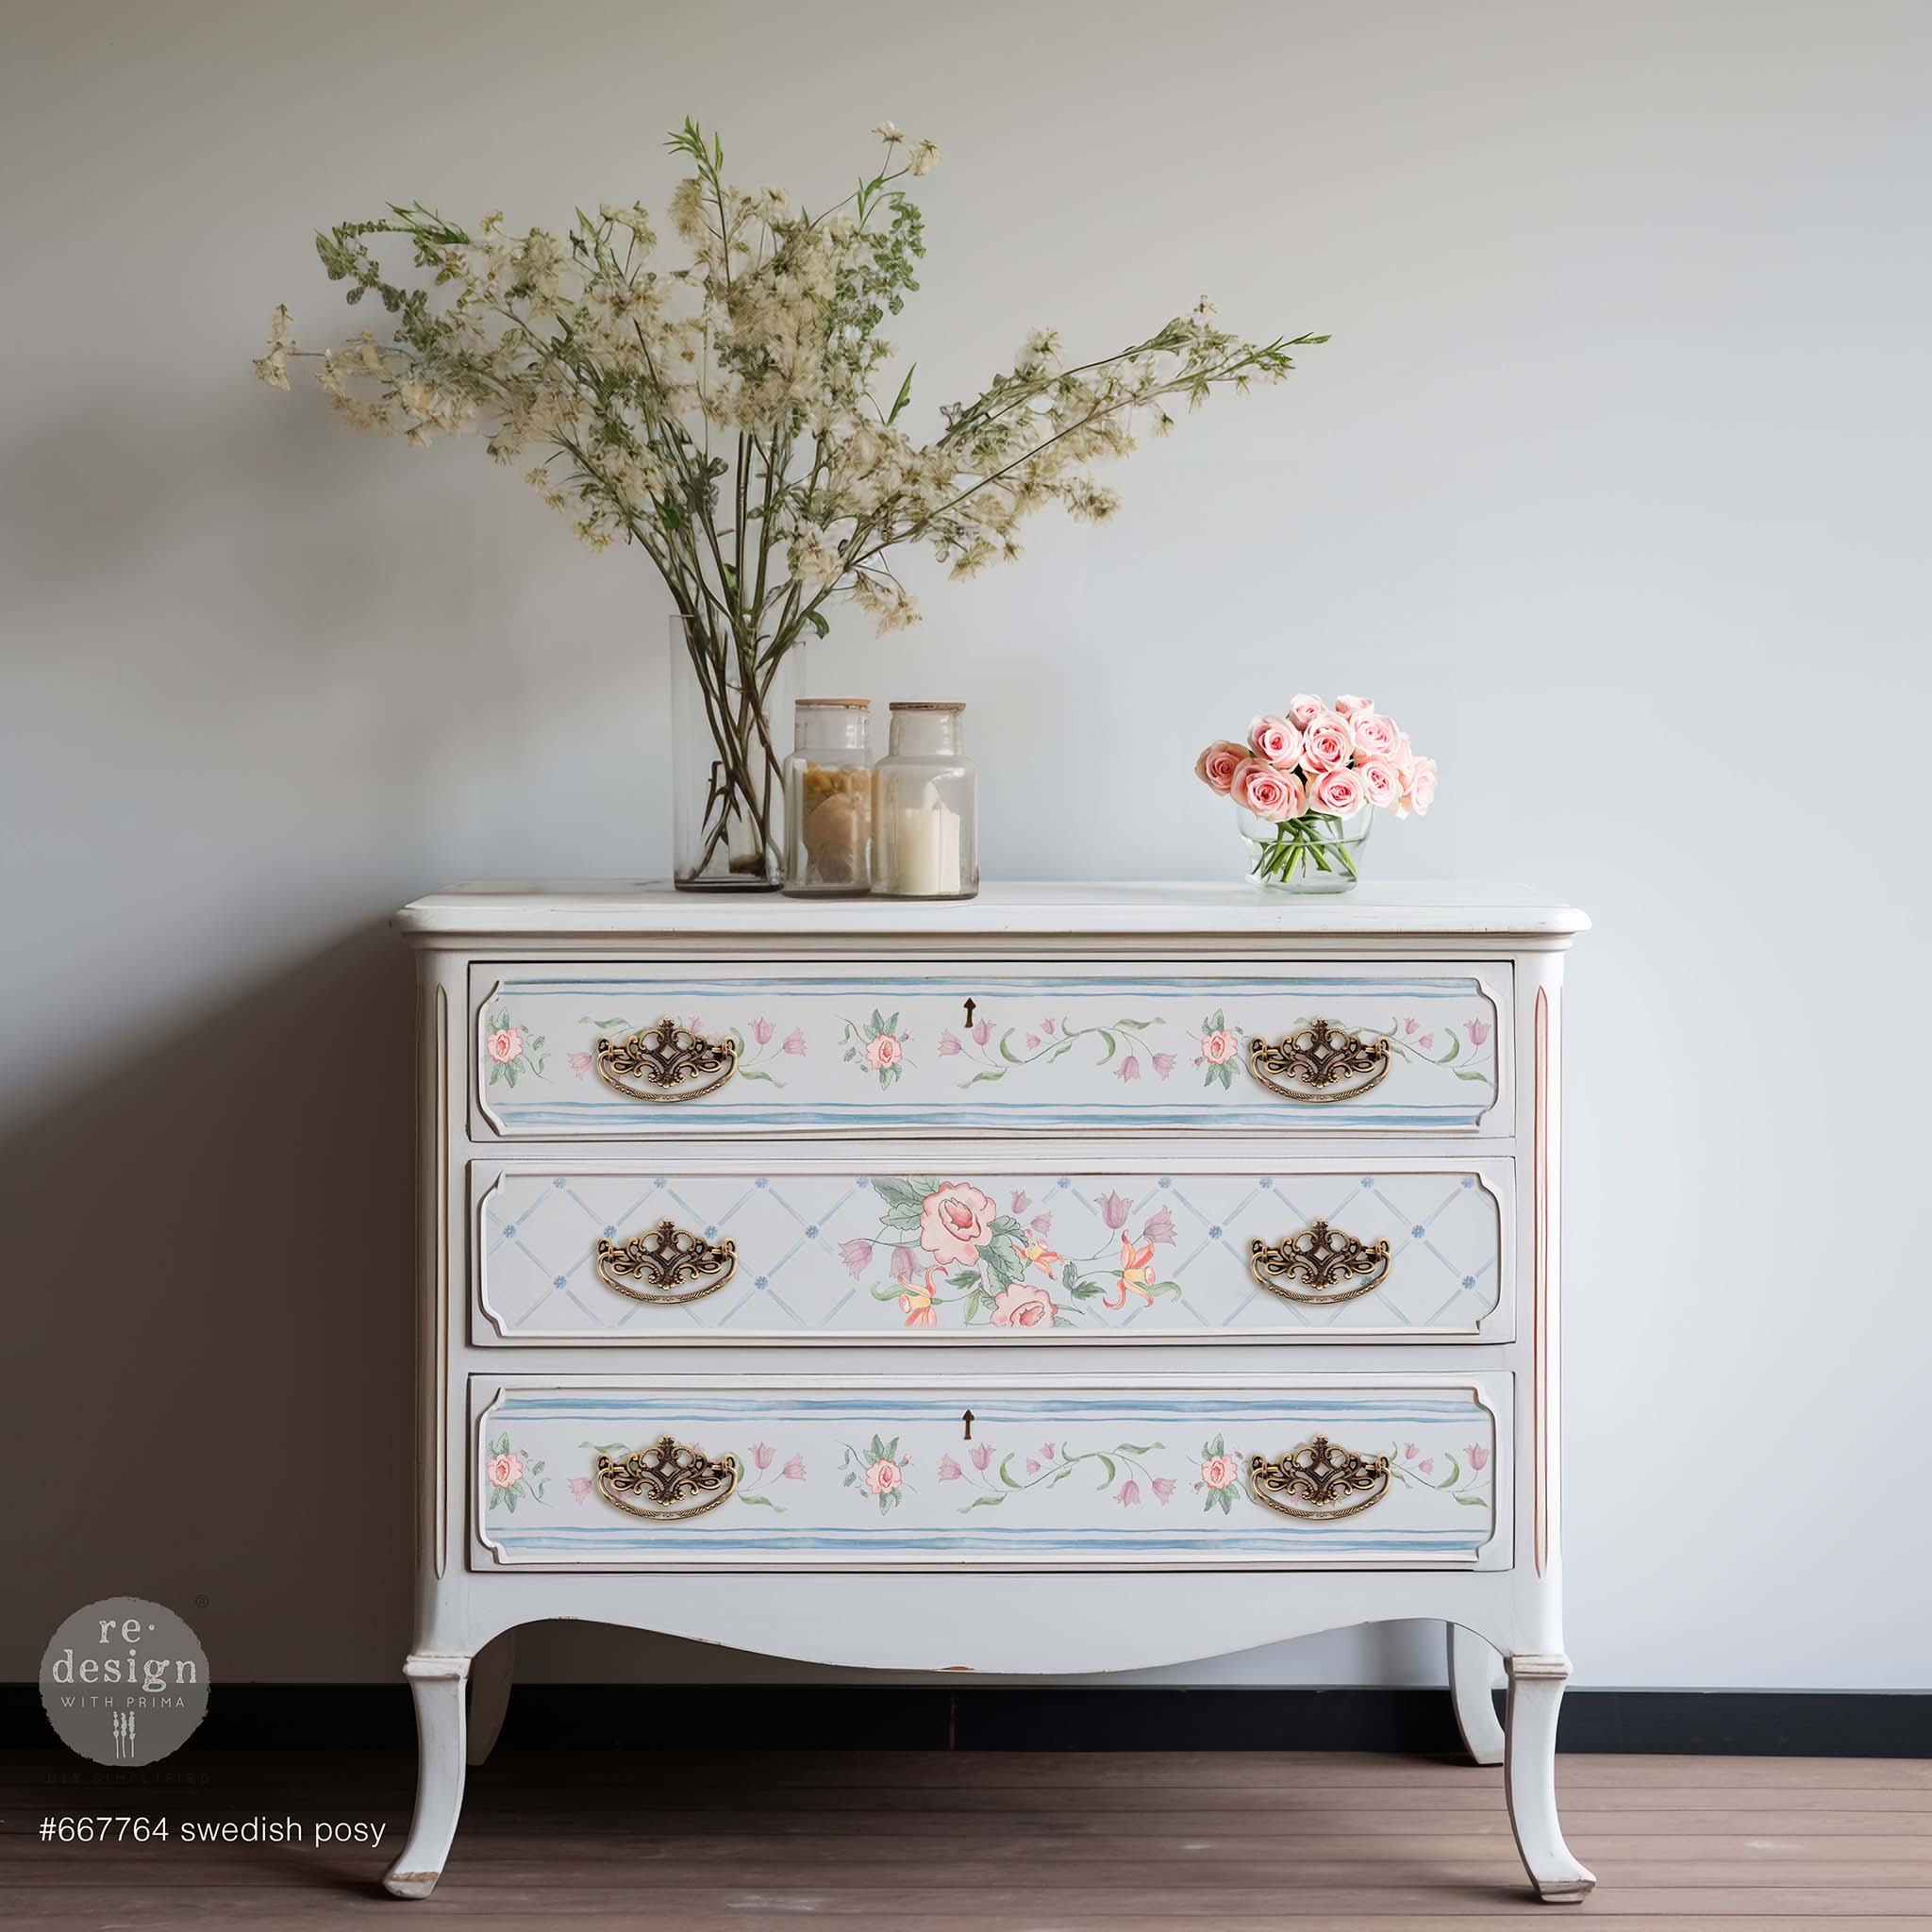 A vintage 3-drawer dresser is painted white and features ReDesign with Prima's Swedish Posy Transfer by Annie Sloan on its drawers.